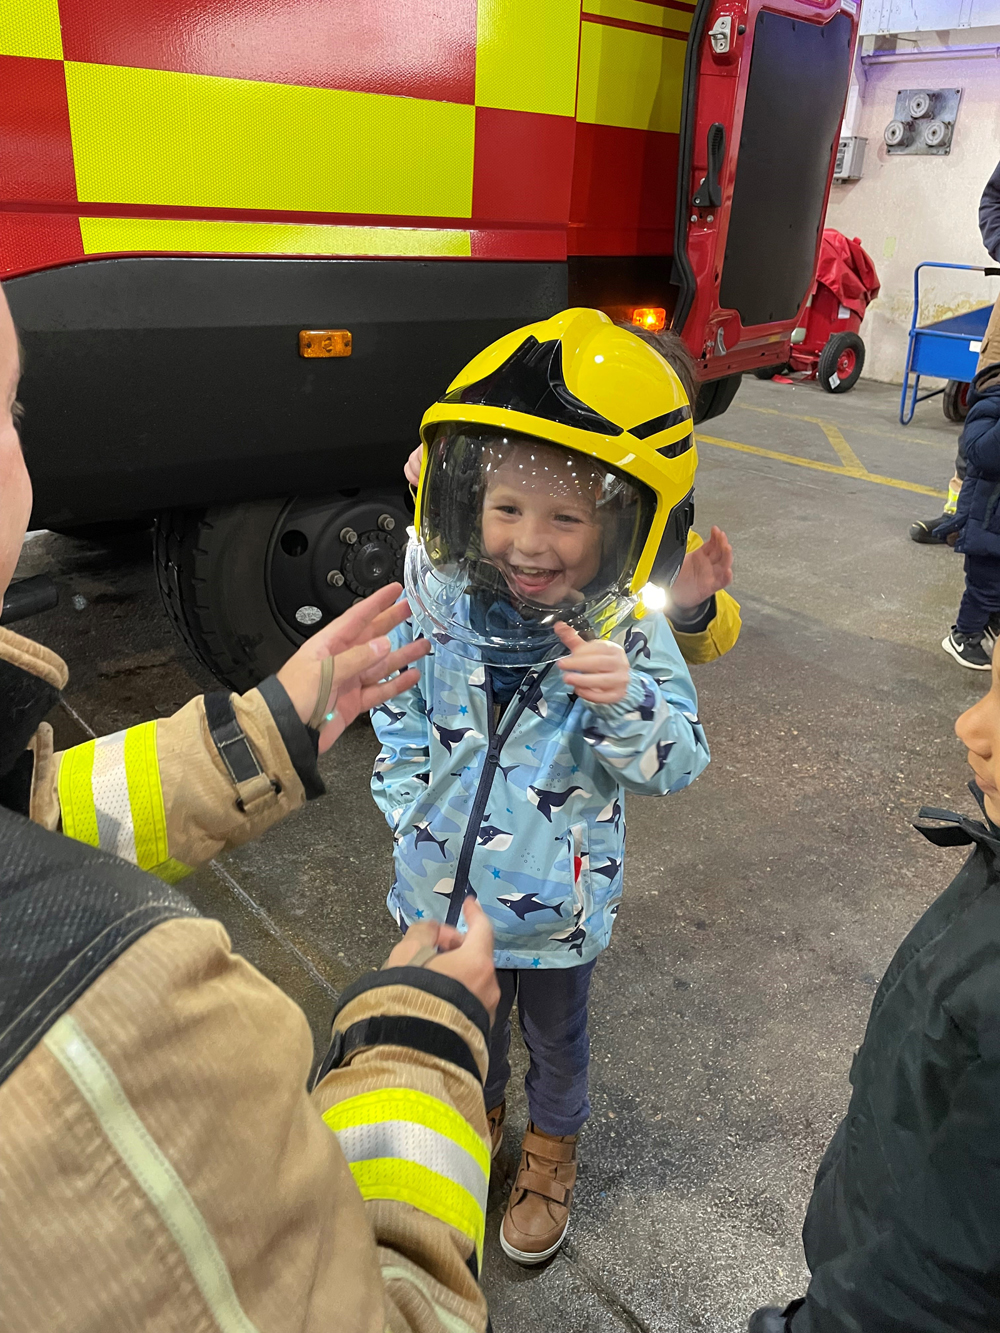 A budding firefighter tries on a helmet during a visit at RAF Wittering